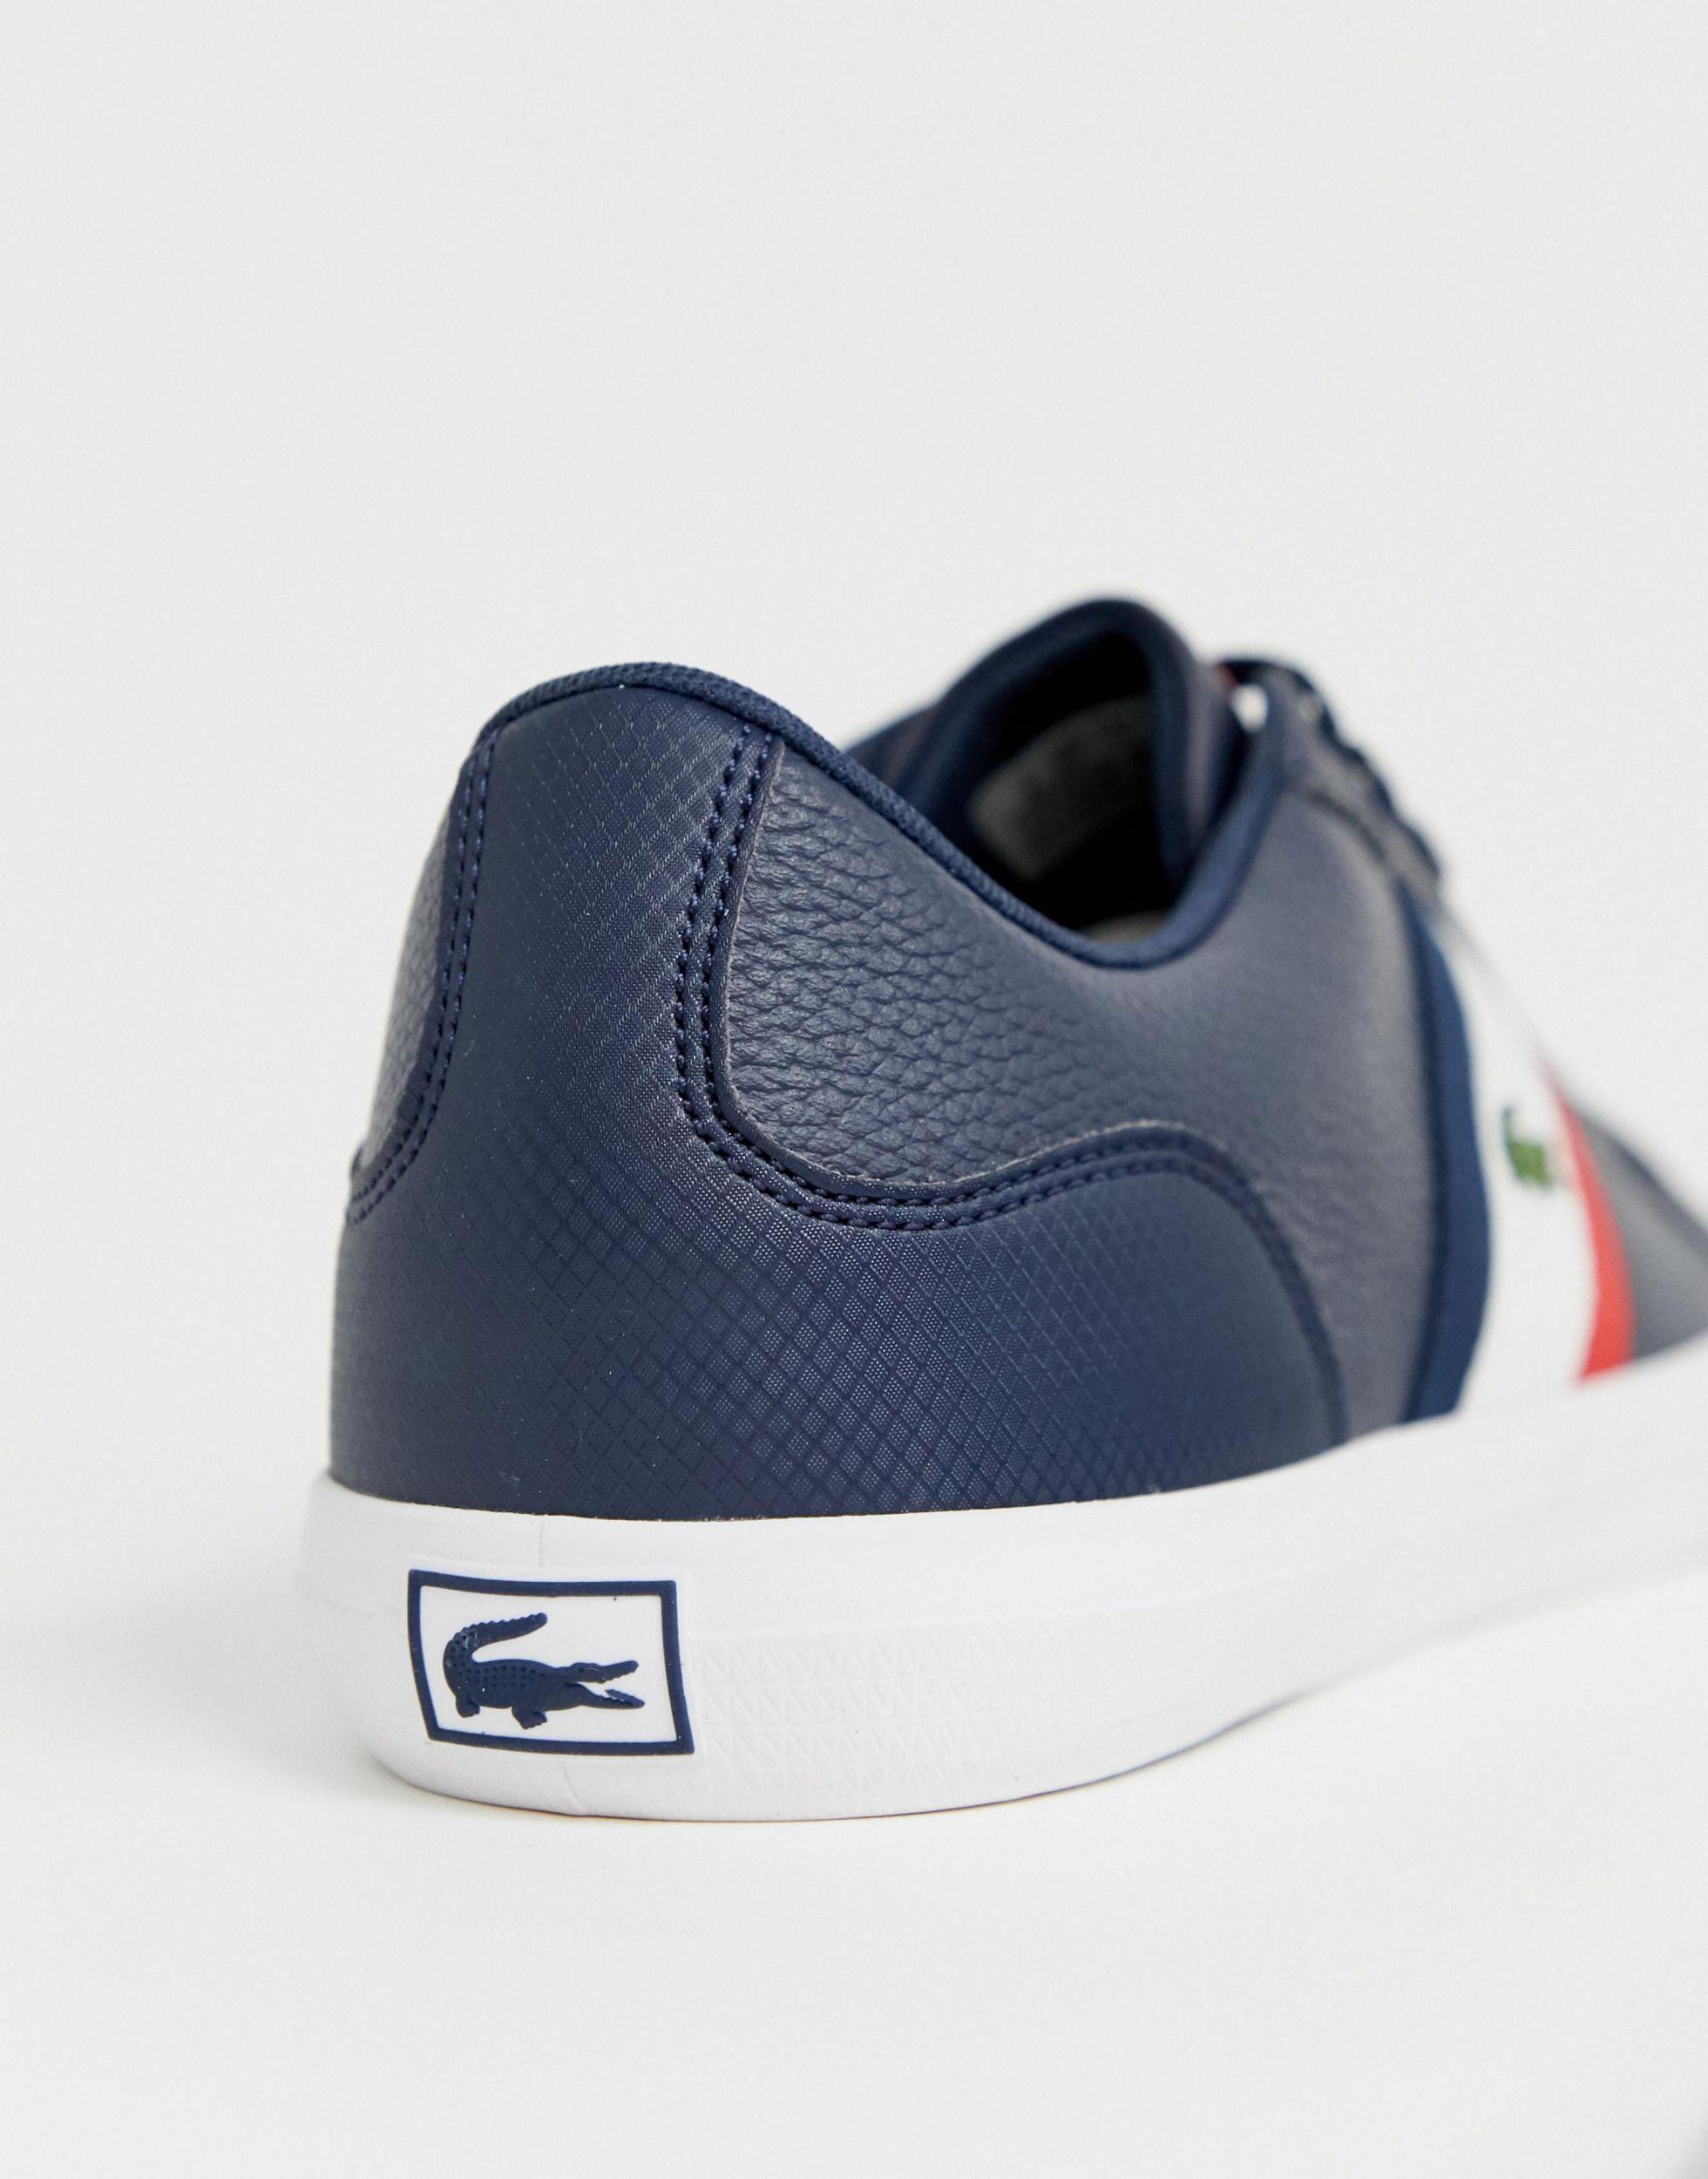 Lacoste Leather Lerond Sneakers With Side Stripe in Navy (Blue) for Men -  Lyst